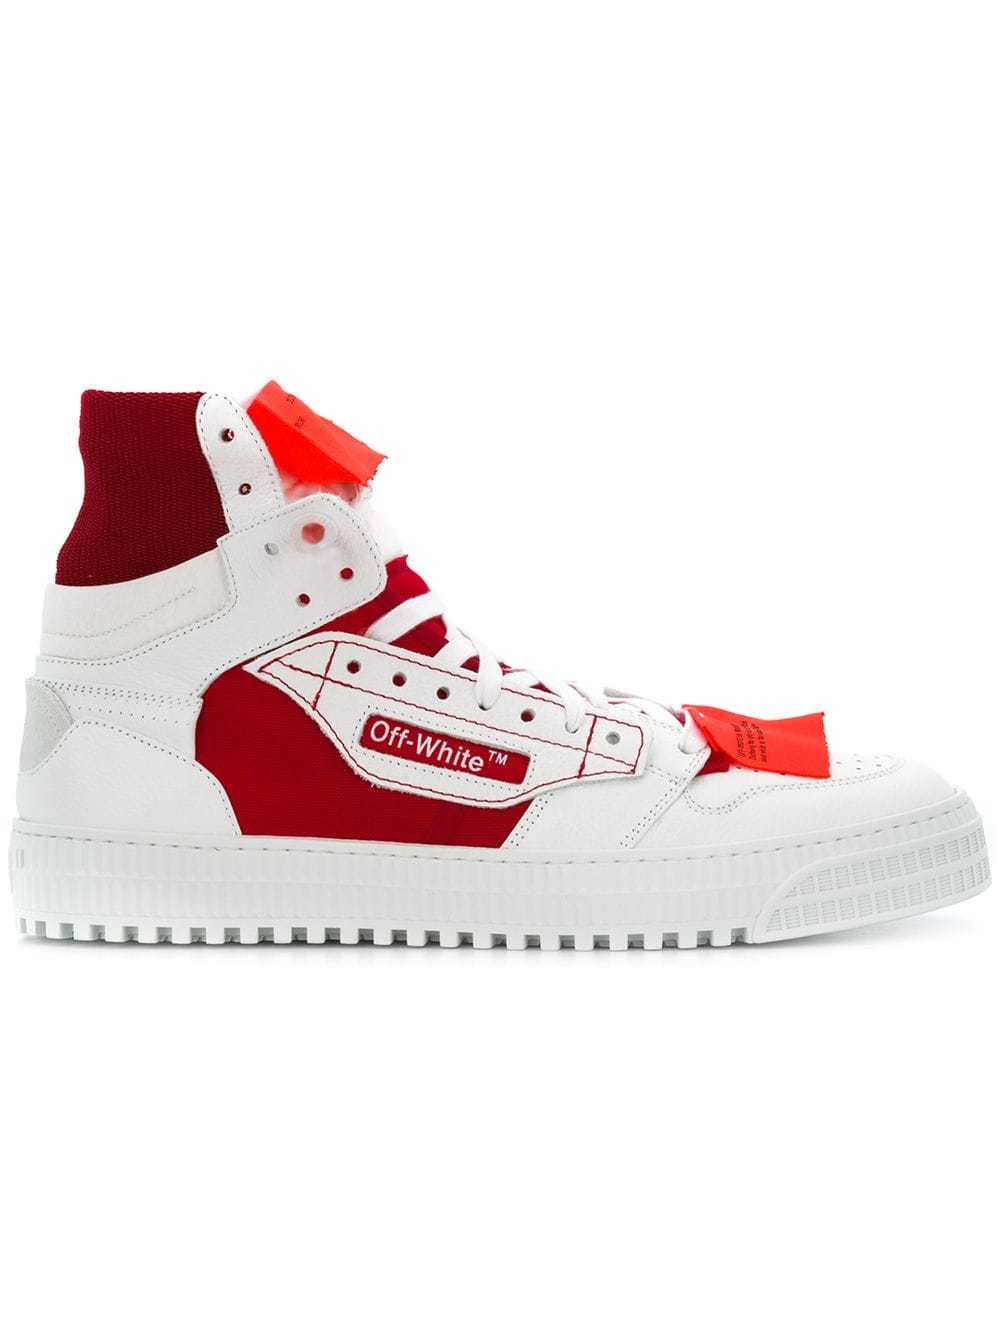 Off-White High Top Sneakers, $469 | farfetch.com | Lookastic